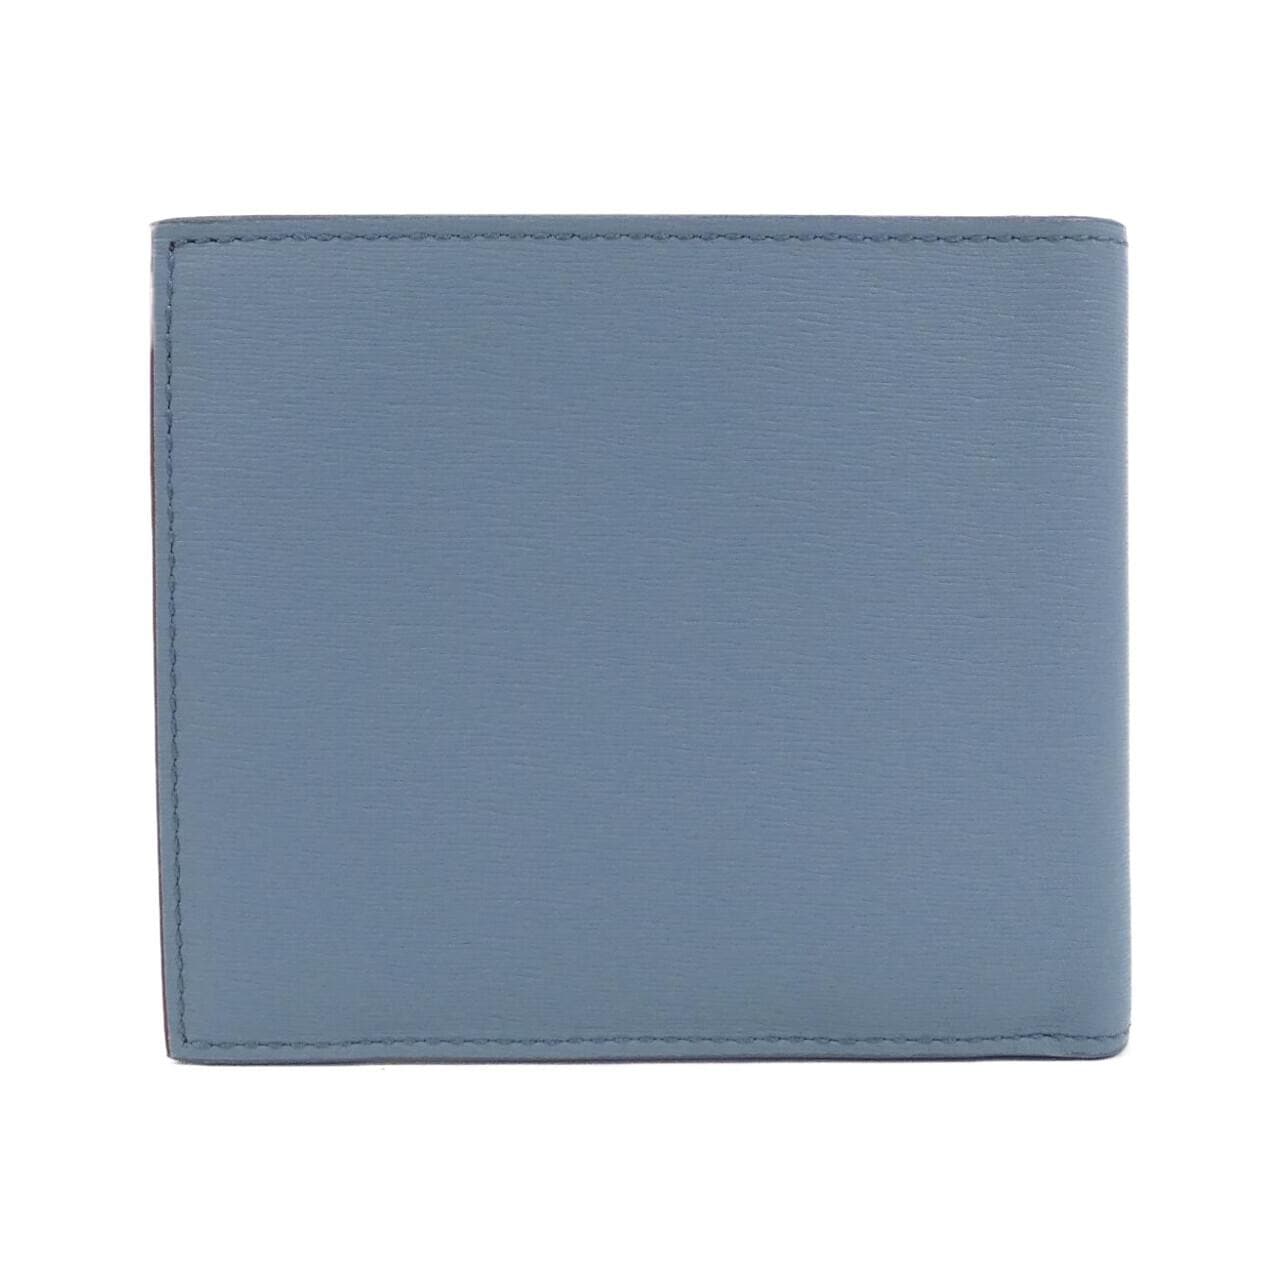 [BRAND NEW] Paul Smith 4833 Wallet